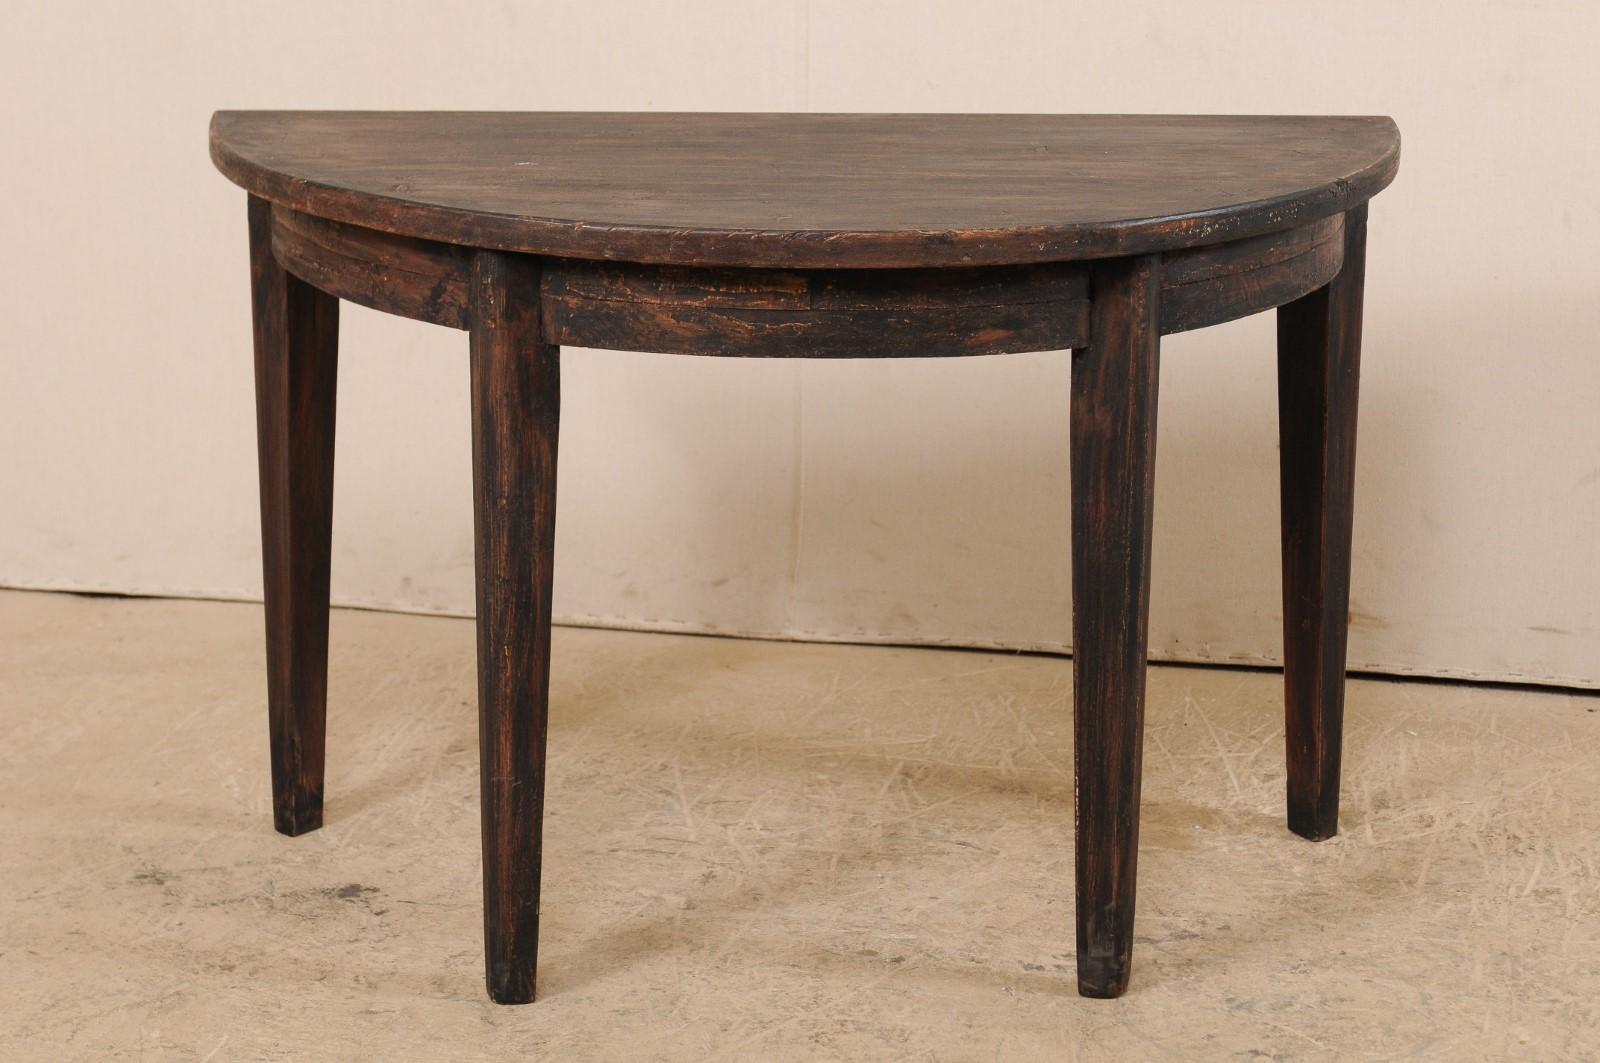 A Swedish demilune table from the mid-19th century. This antique demilune table from Sweden features a half moon top over rounded apron, all raised upon four squared legs which taper gently at their feet. There is a dark finish with ebony, which